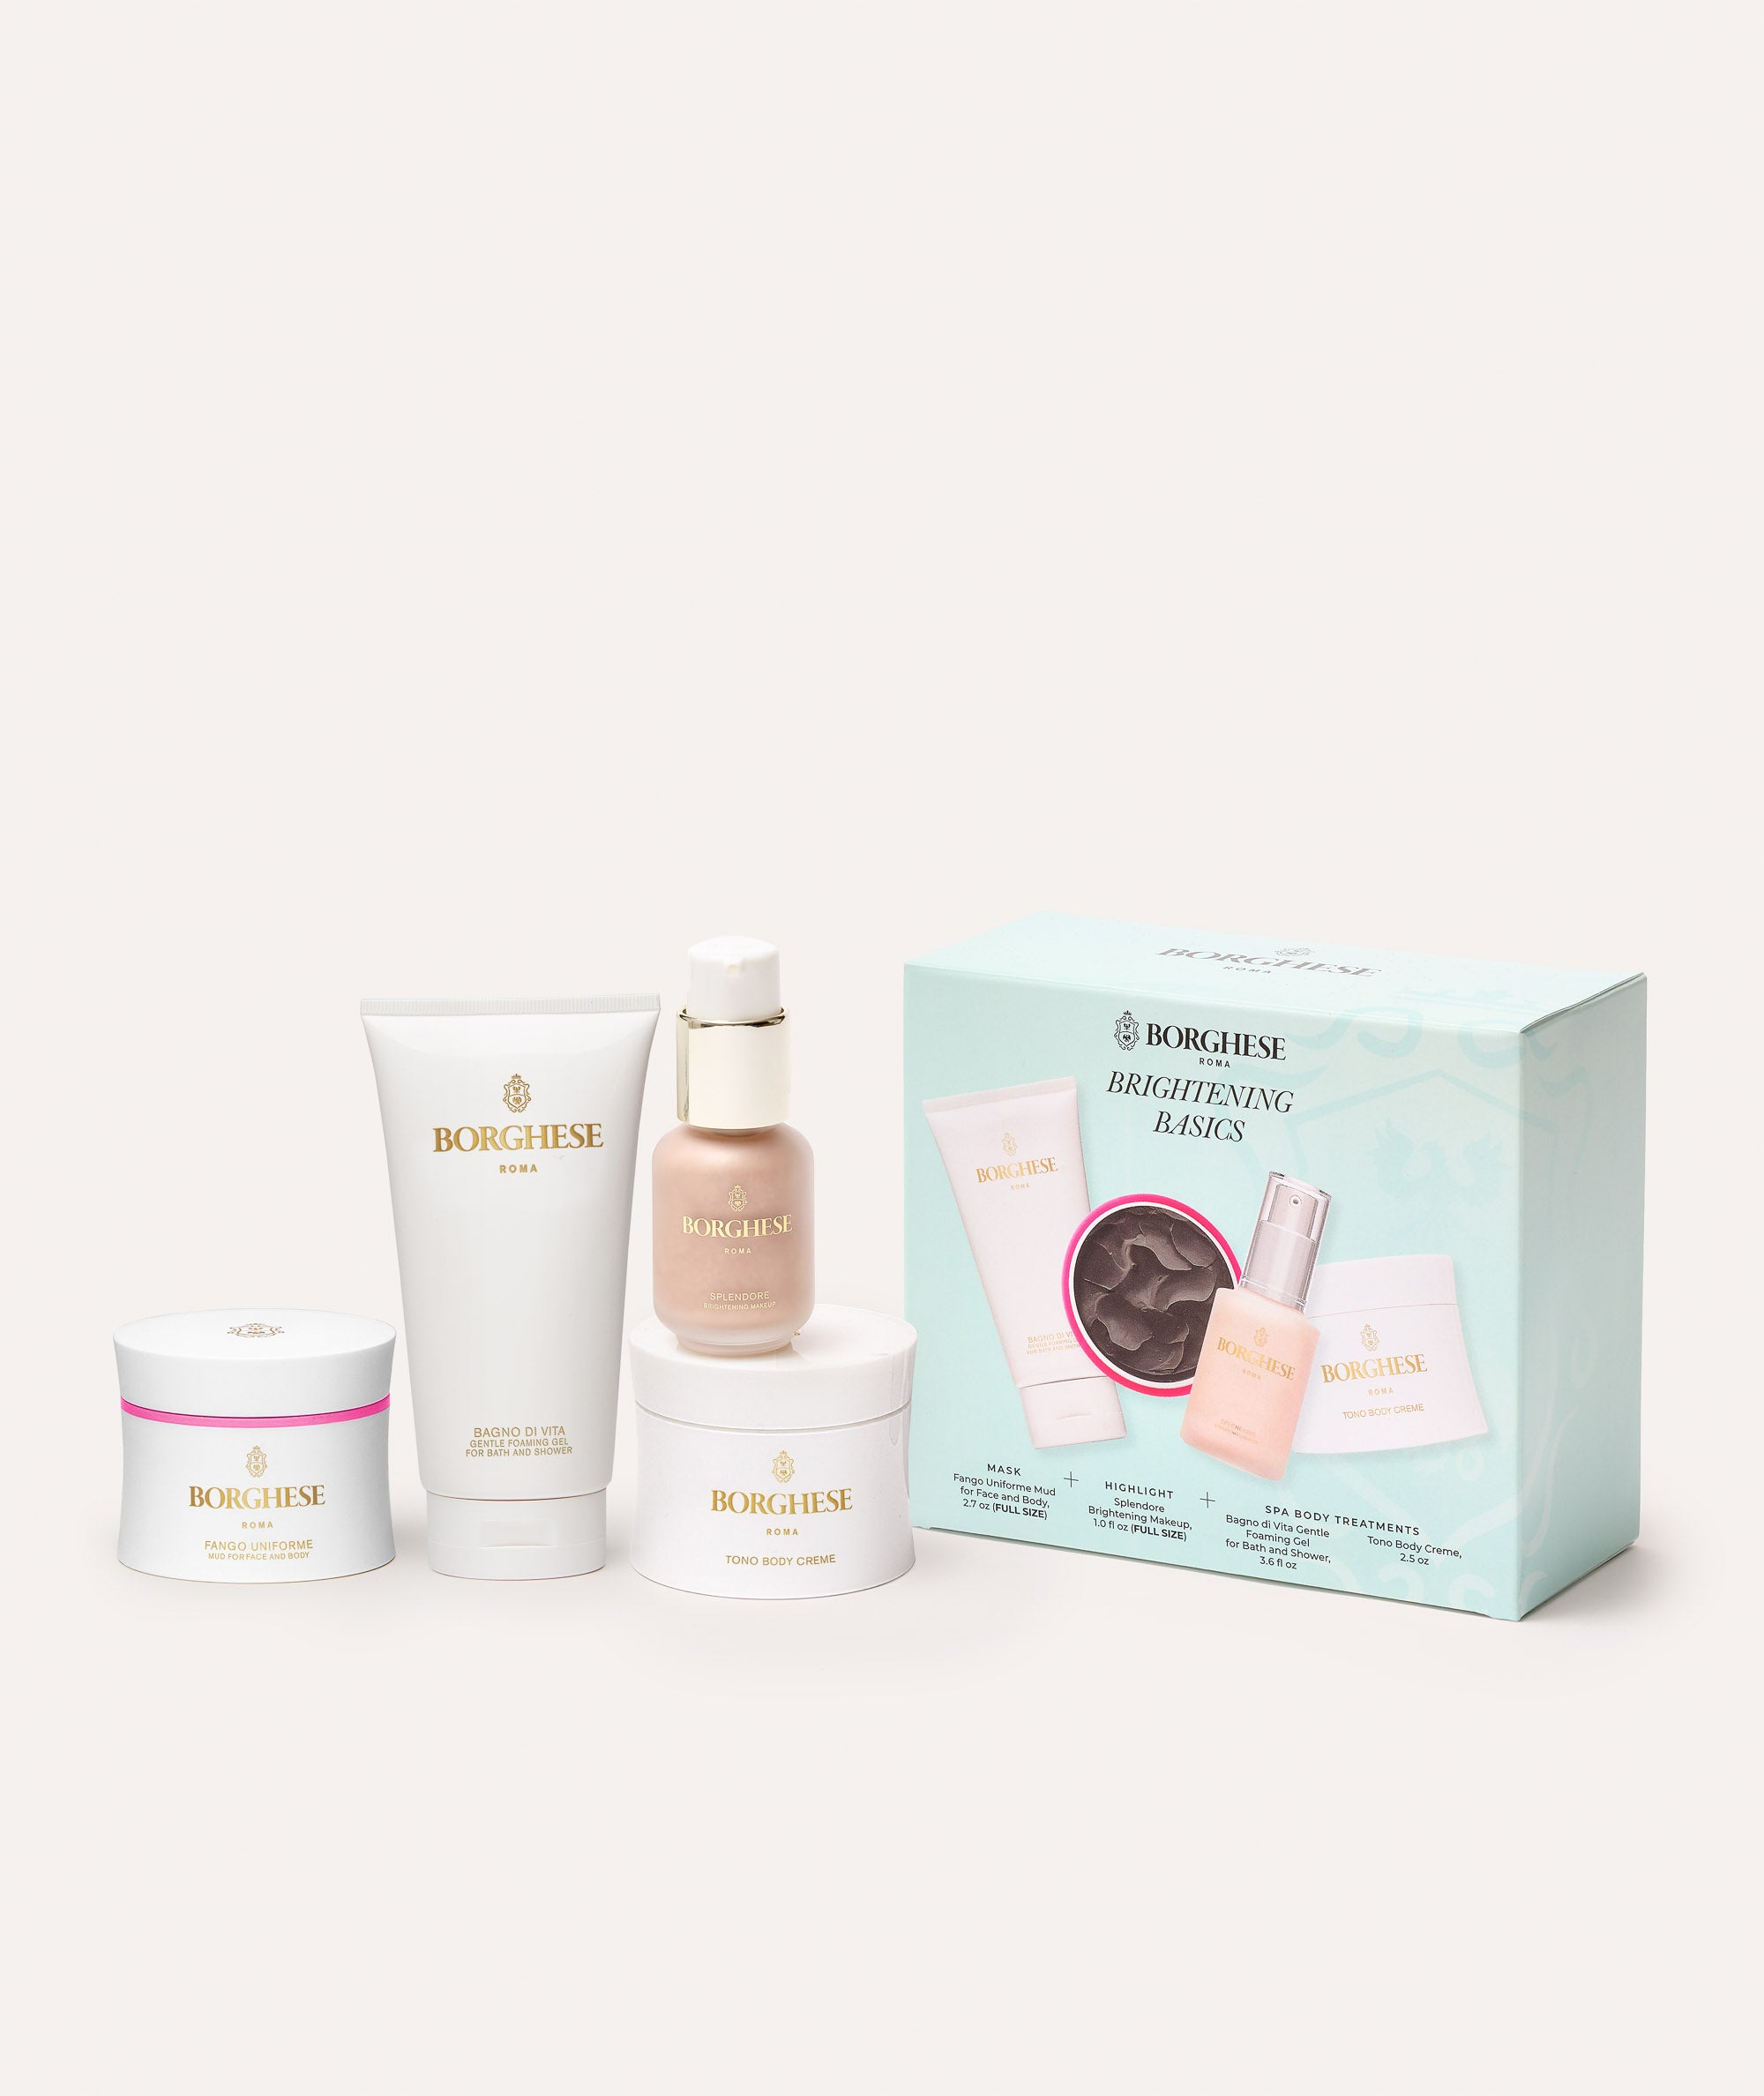 The Borghese 4-Piece Brightening Basics Gift Set contents and light blue gift box